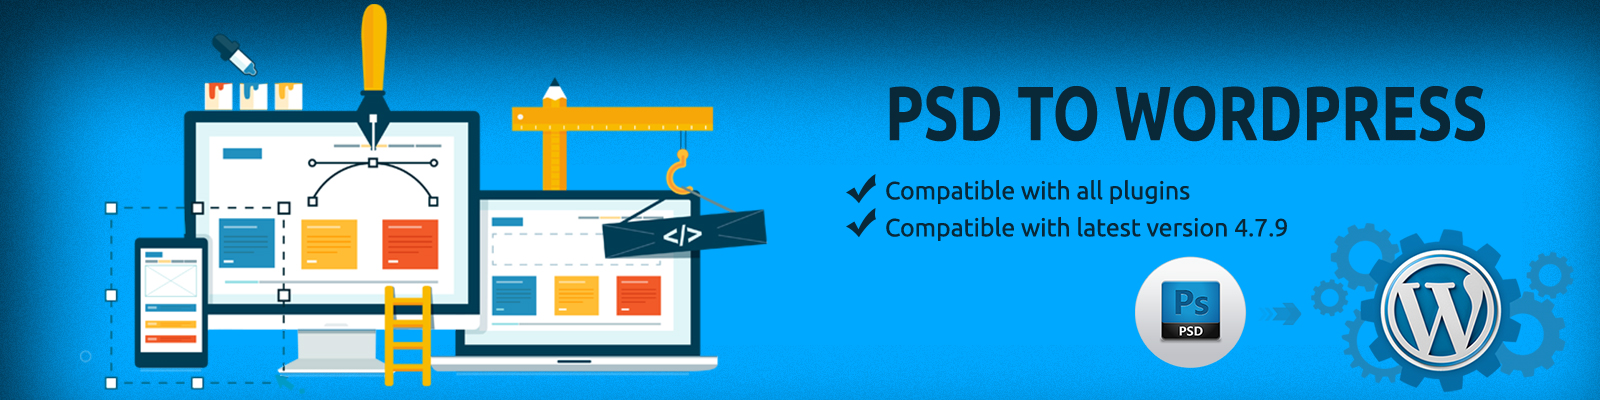 psd to wordpress conversion services